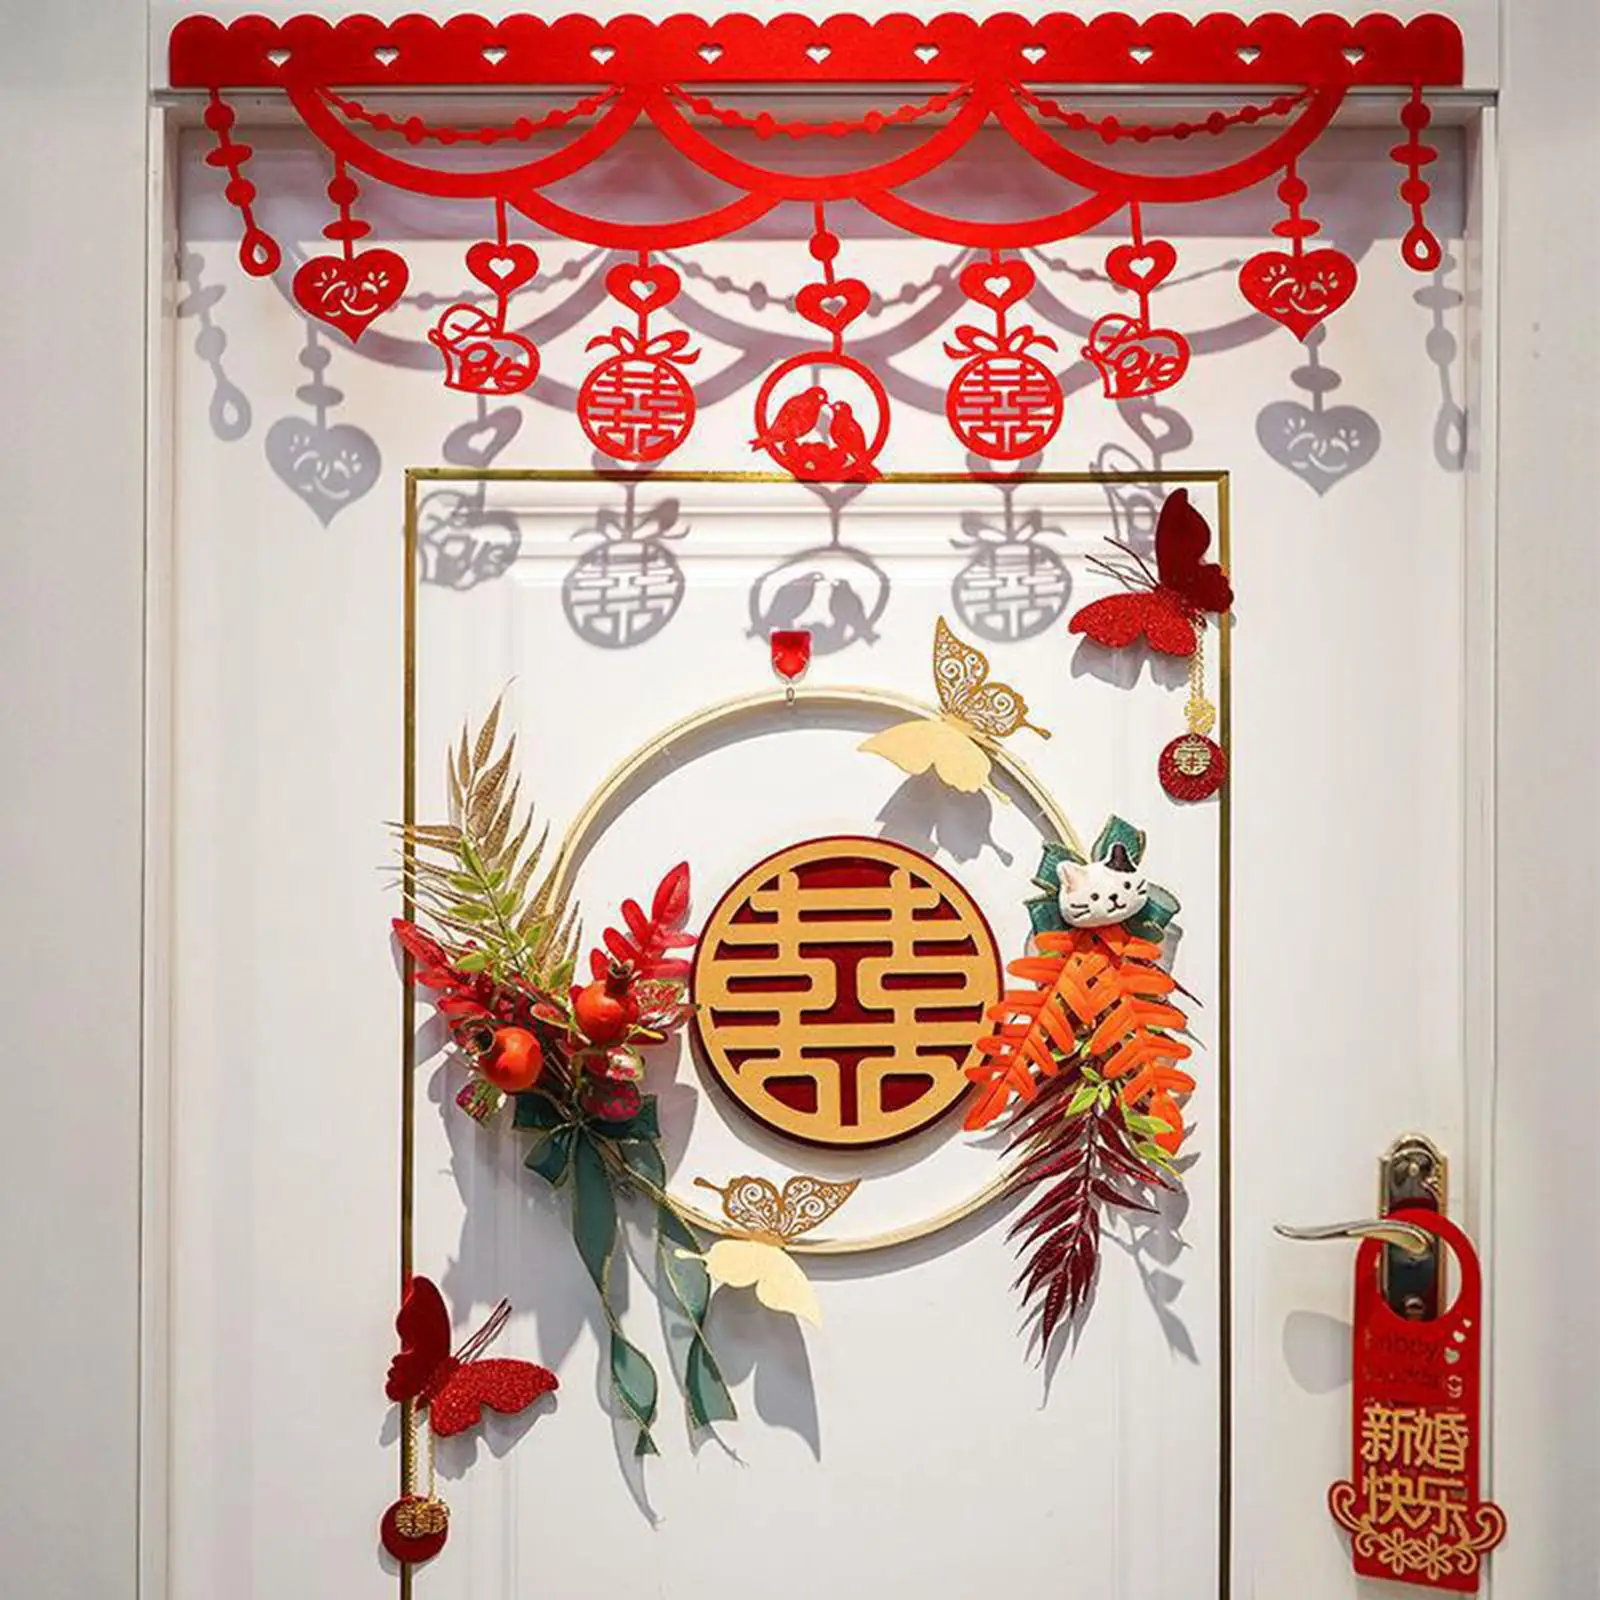 Chinese Wedding Double Happiness Hanging Garland Wall Door Ornaments Home Bedroom Decor Decorative DIY New House Supplies